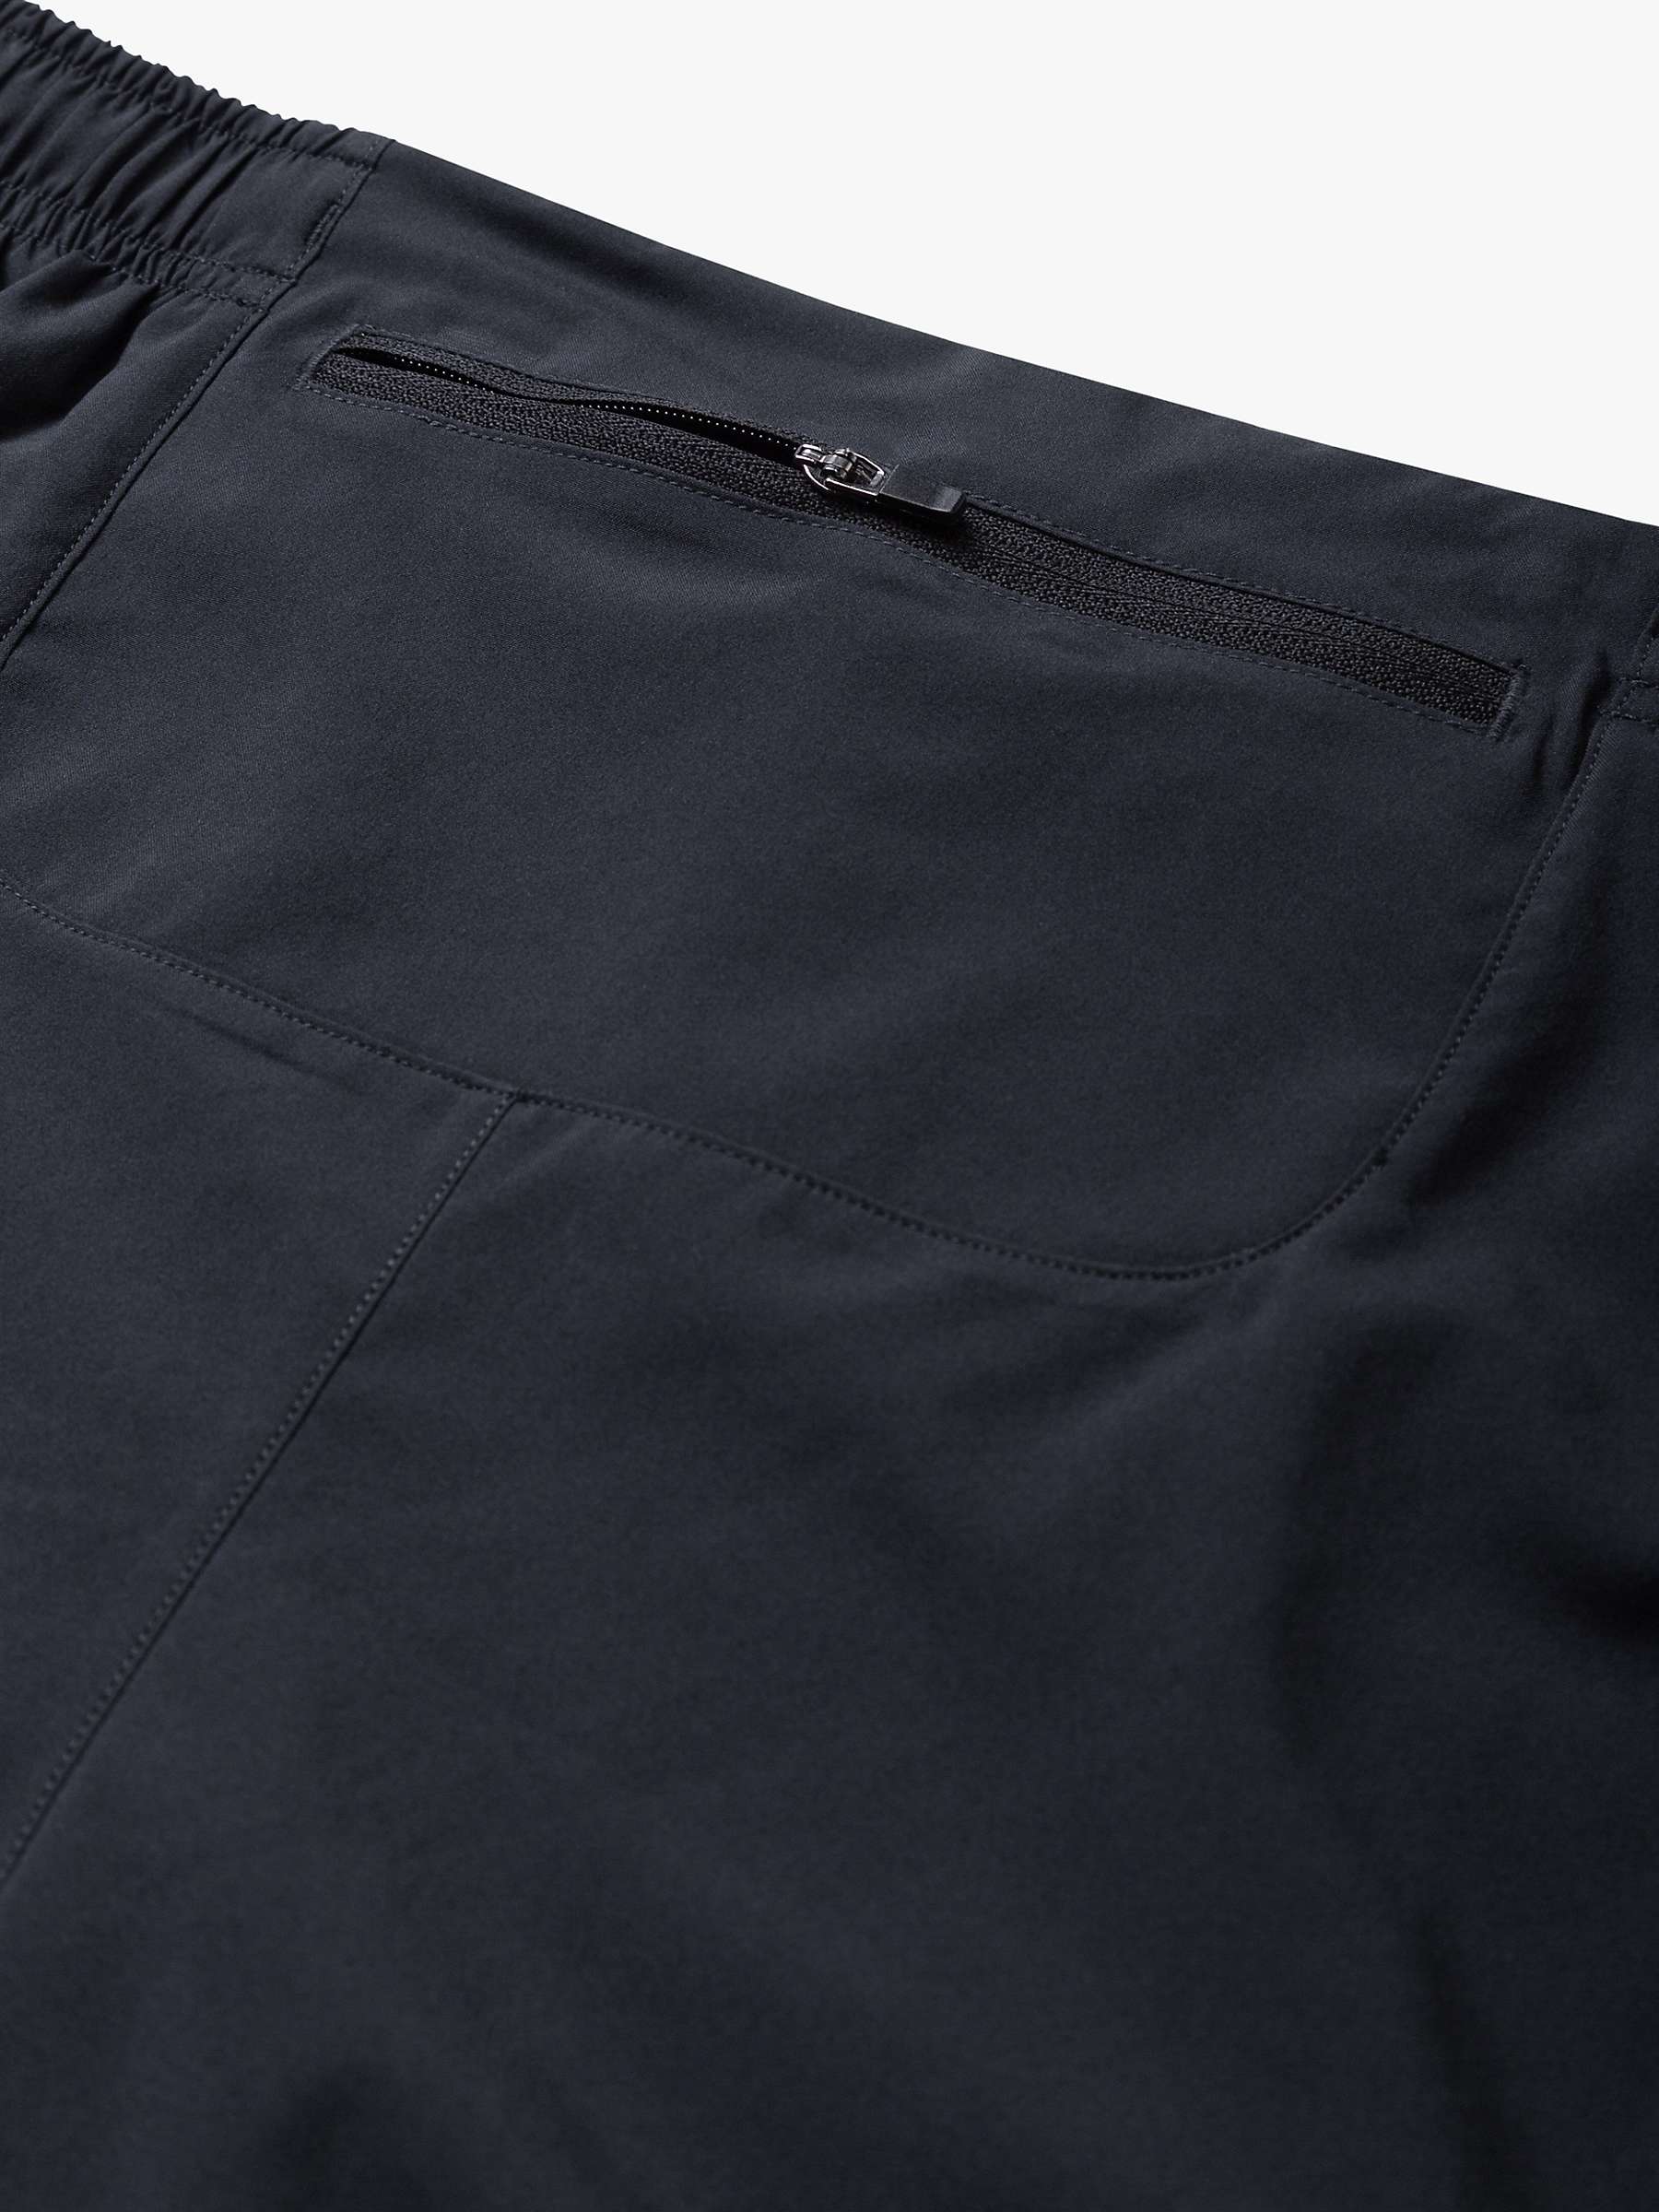 Buy Ronhill Two-In-One Shorts, Black Online at johnlewis.com